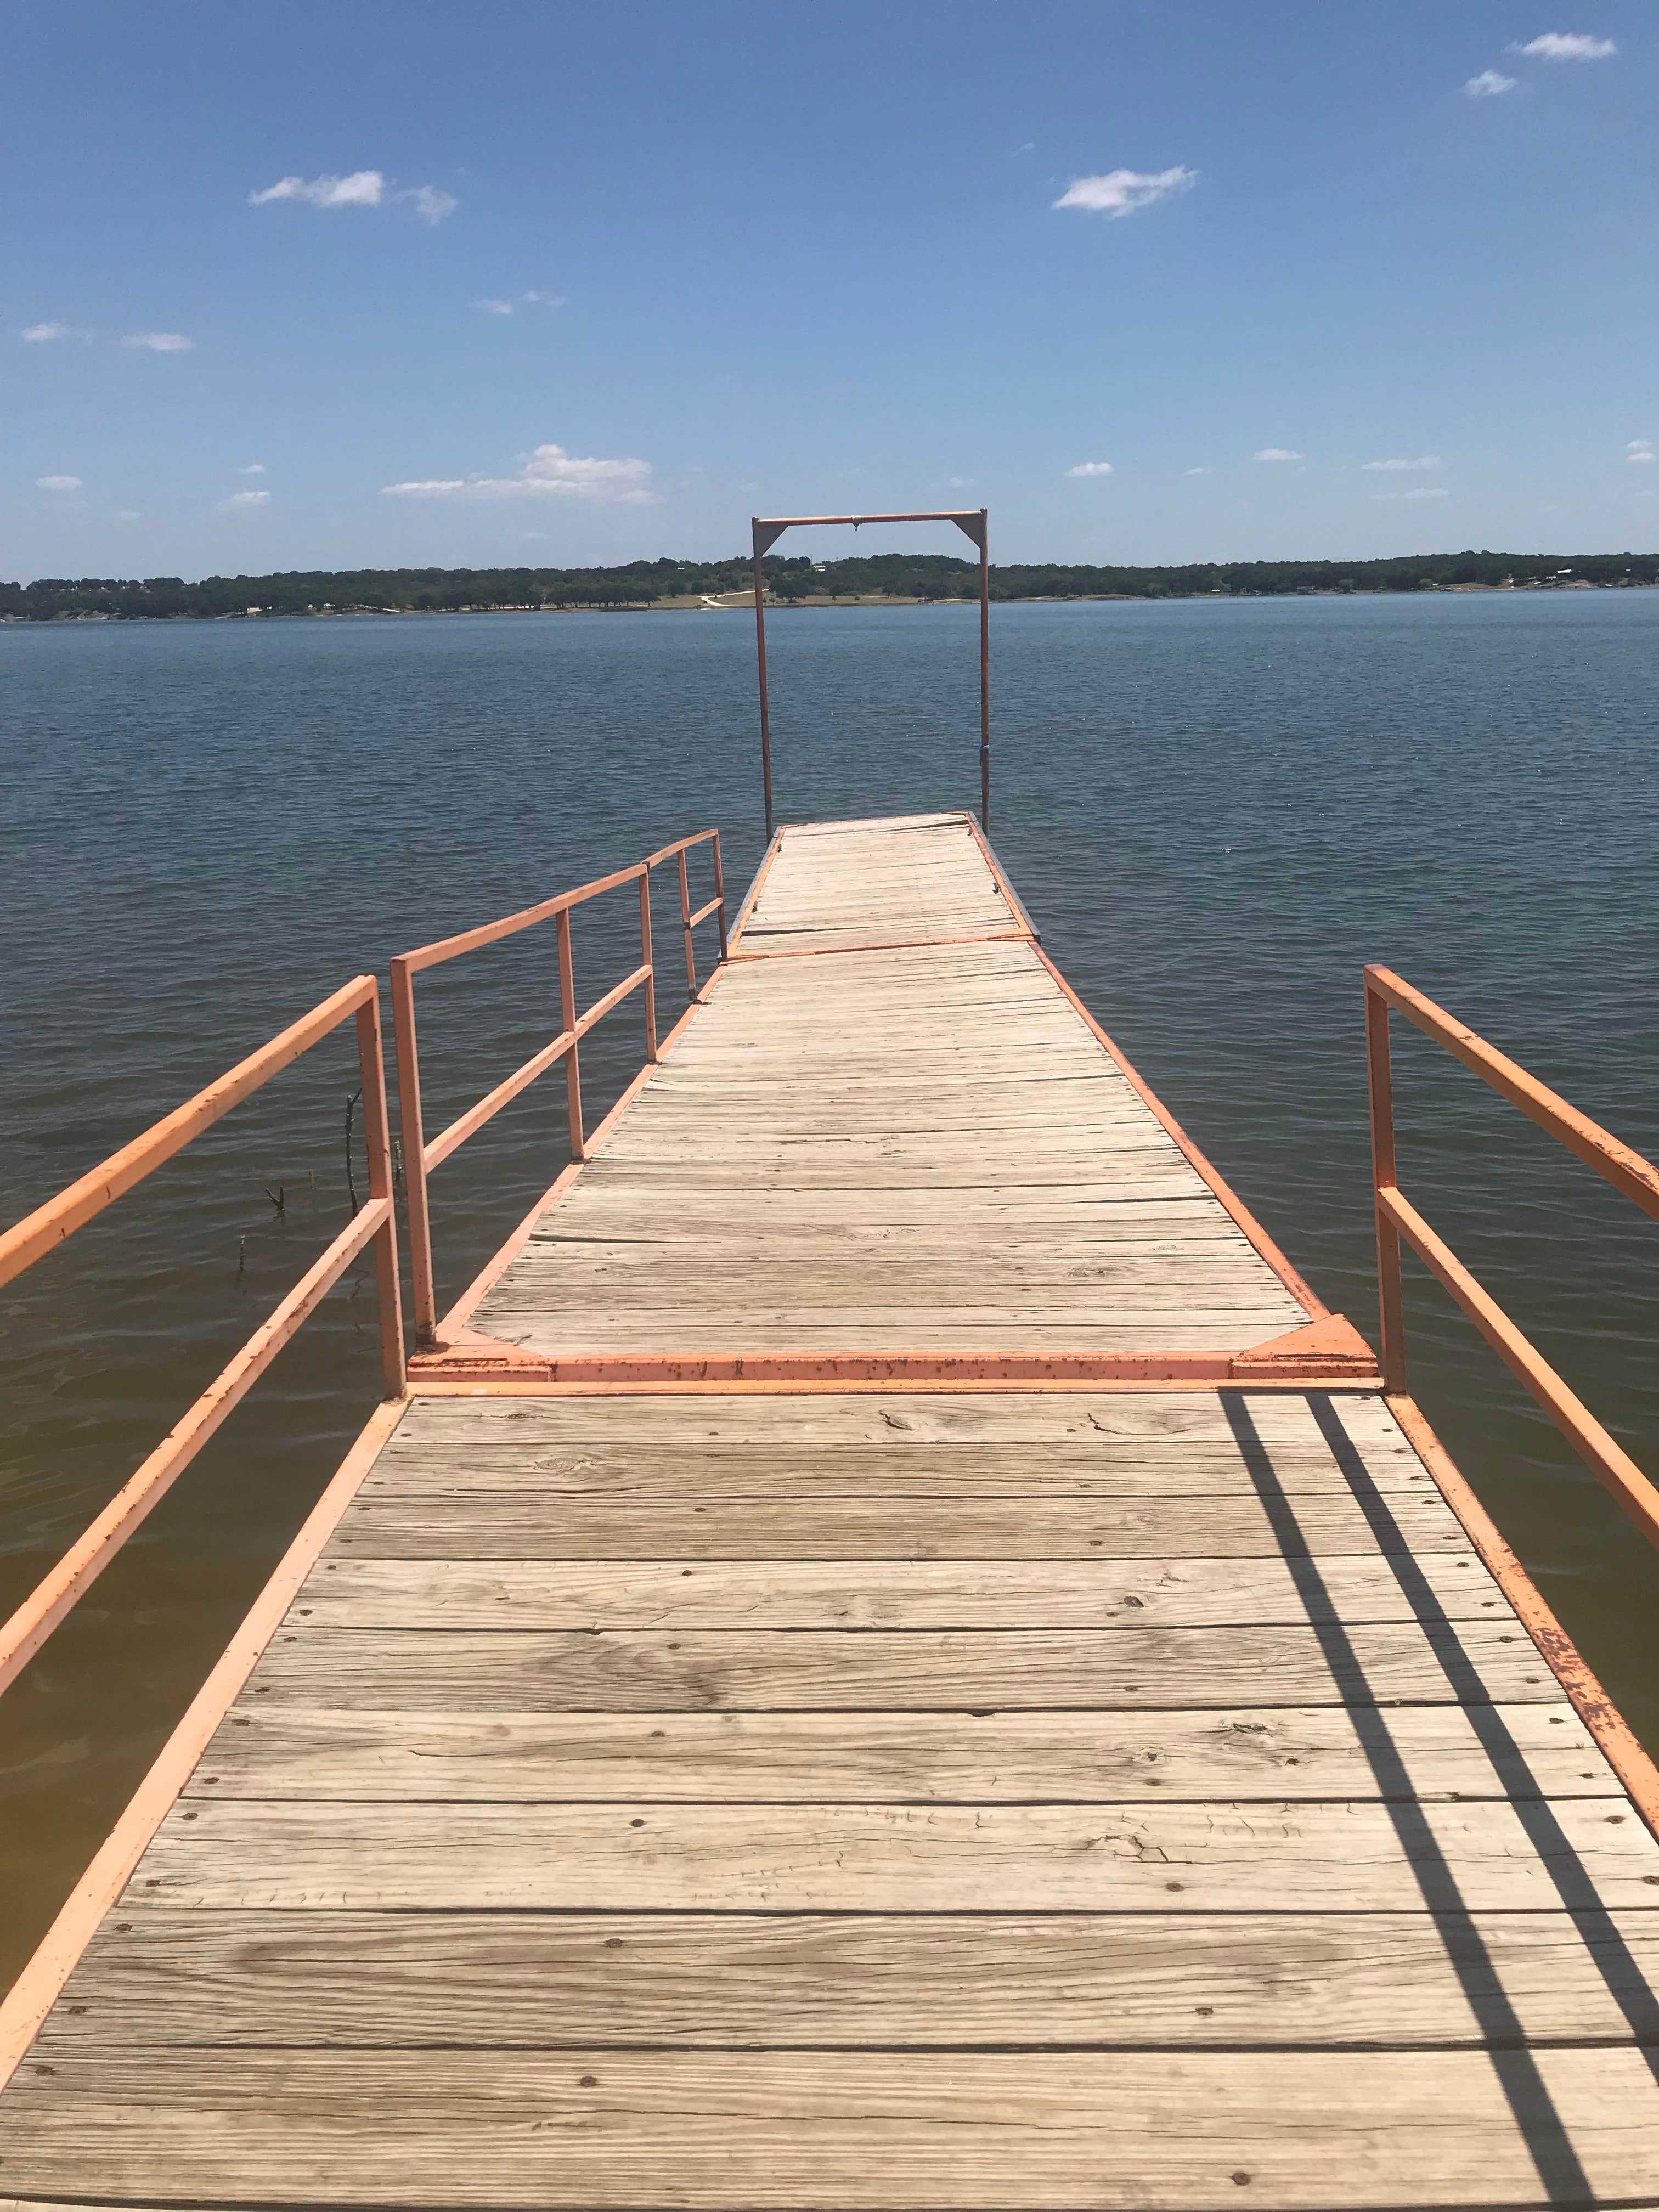 This is the main dock at the boat ramp.  It is a floating dock and very uneven but in otherwise great shape.